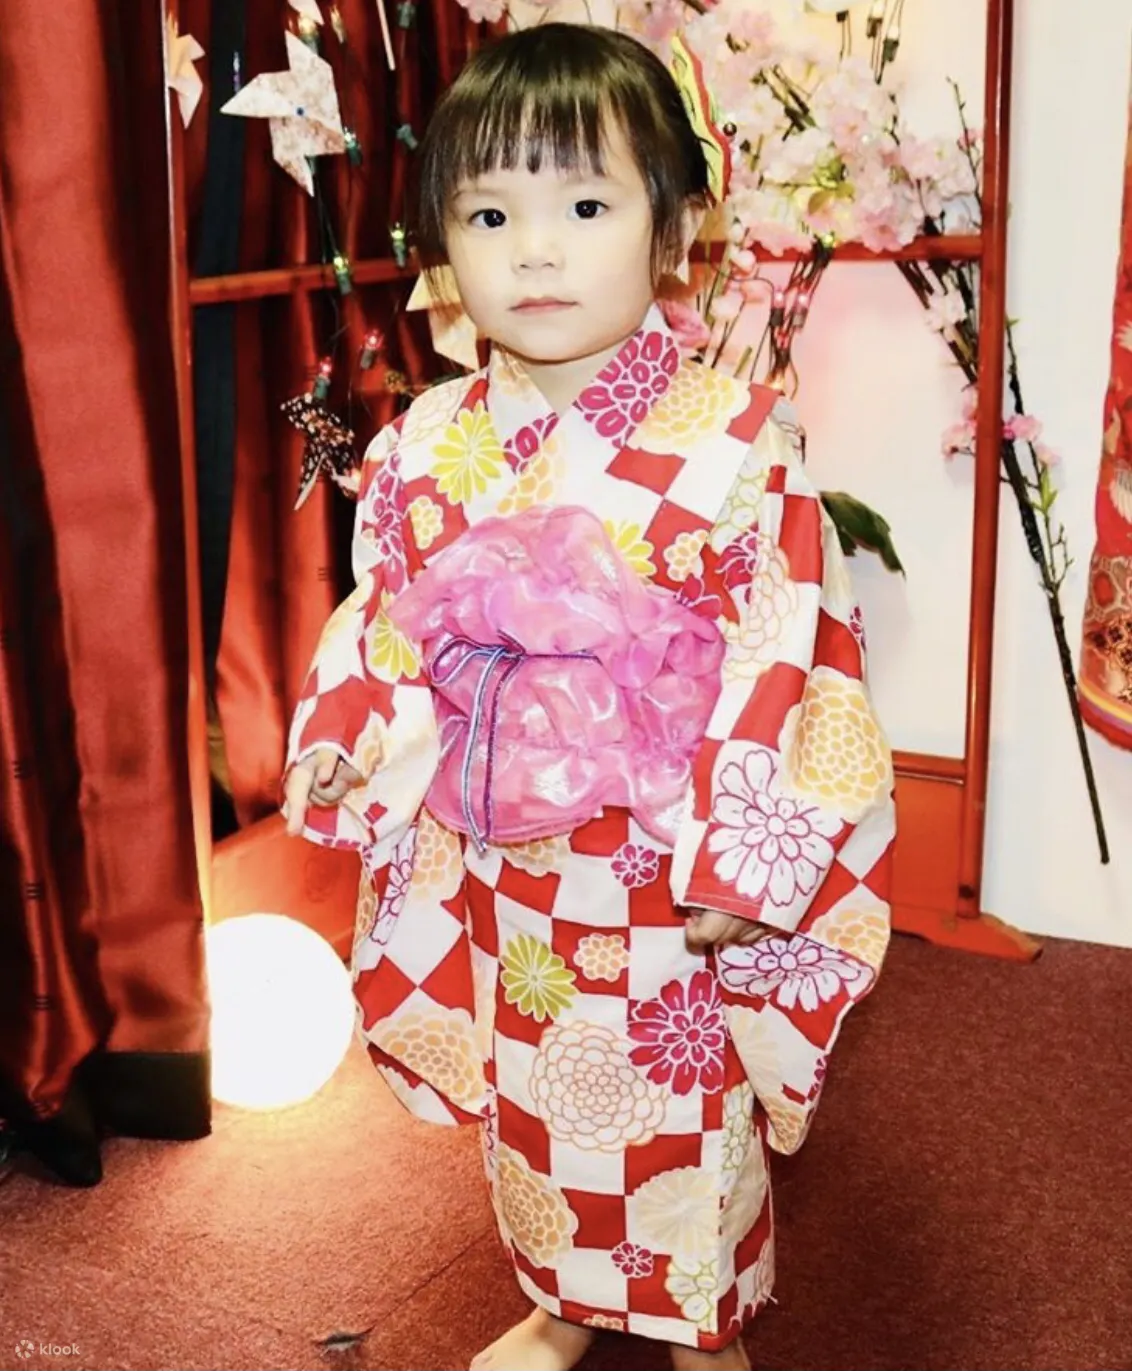 Hanaka Kimono Rental With Hairstyling in Asakusa - Frequently Asked Questions